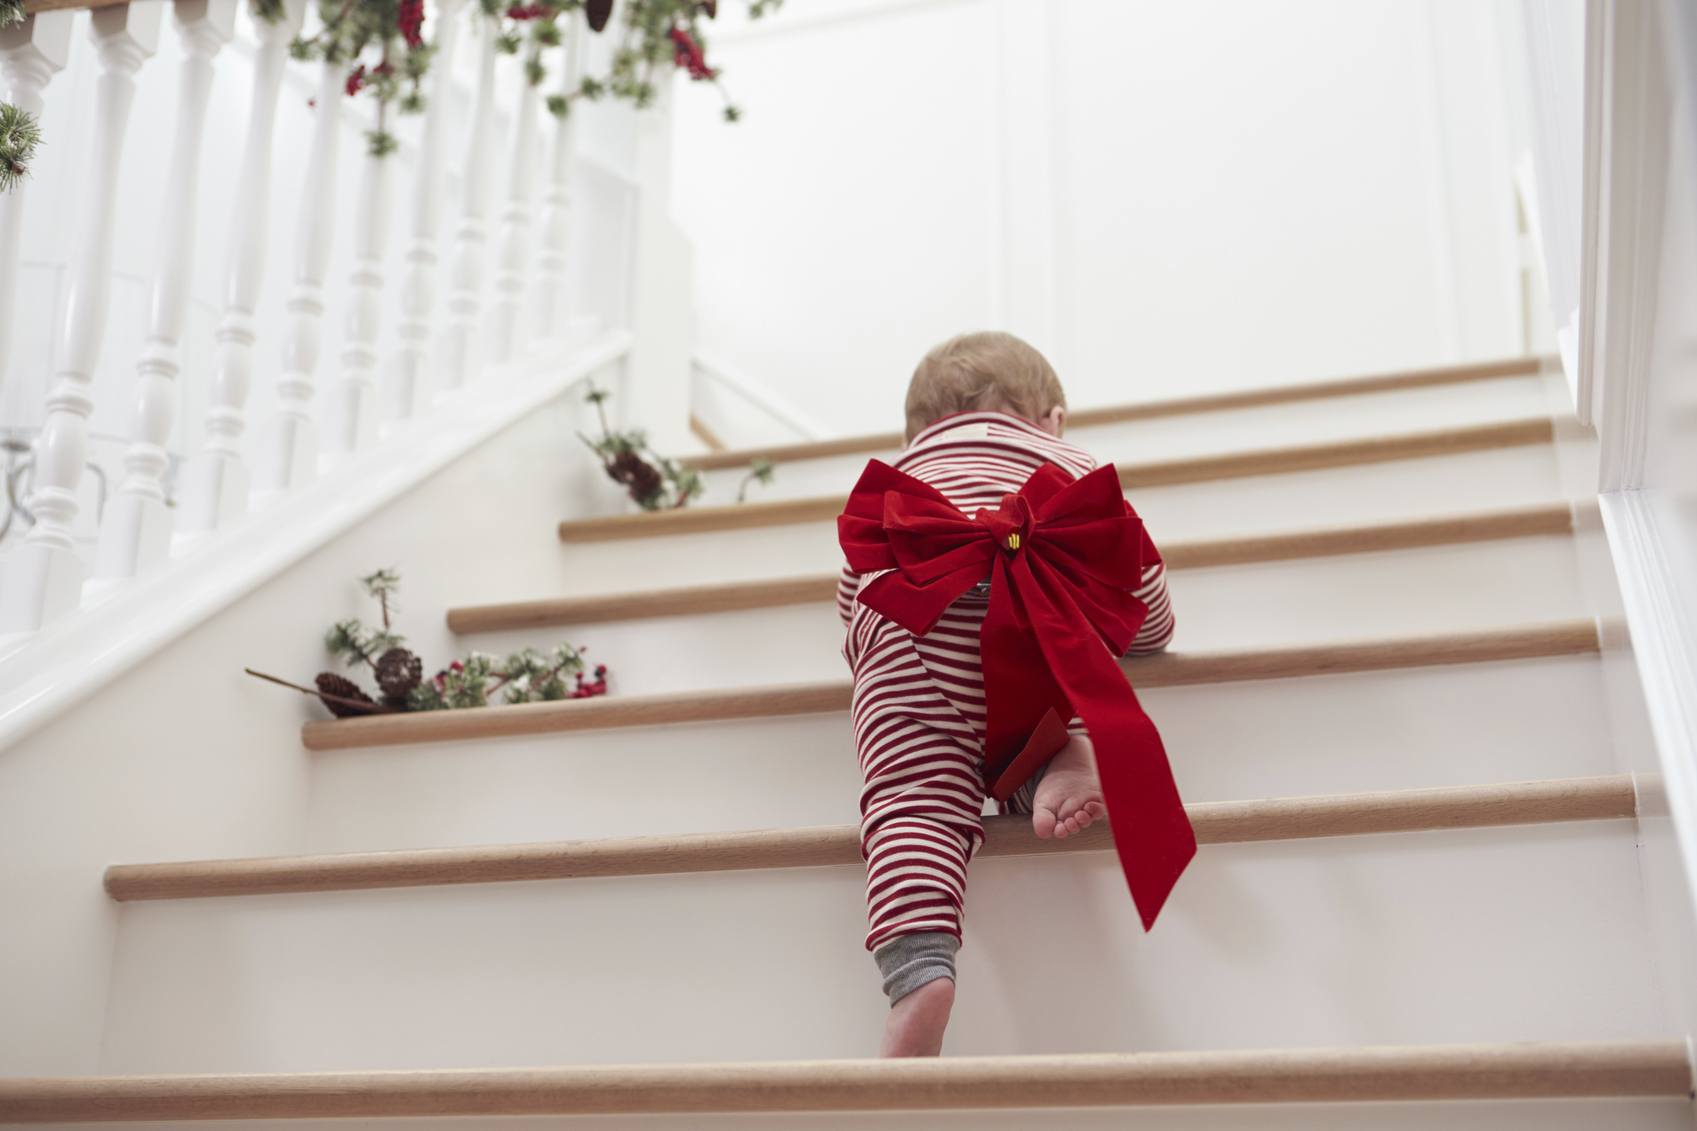 Baby crawling up staircase with bow